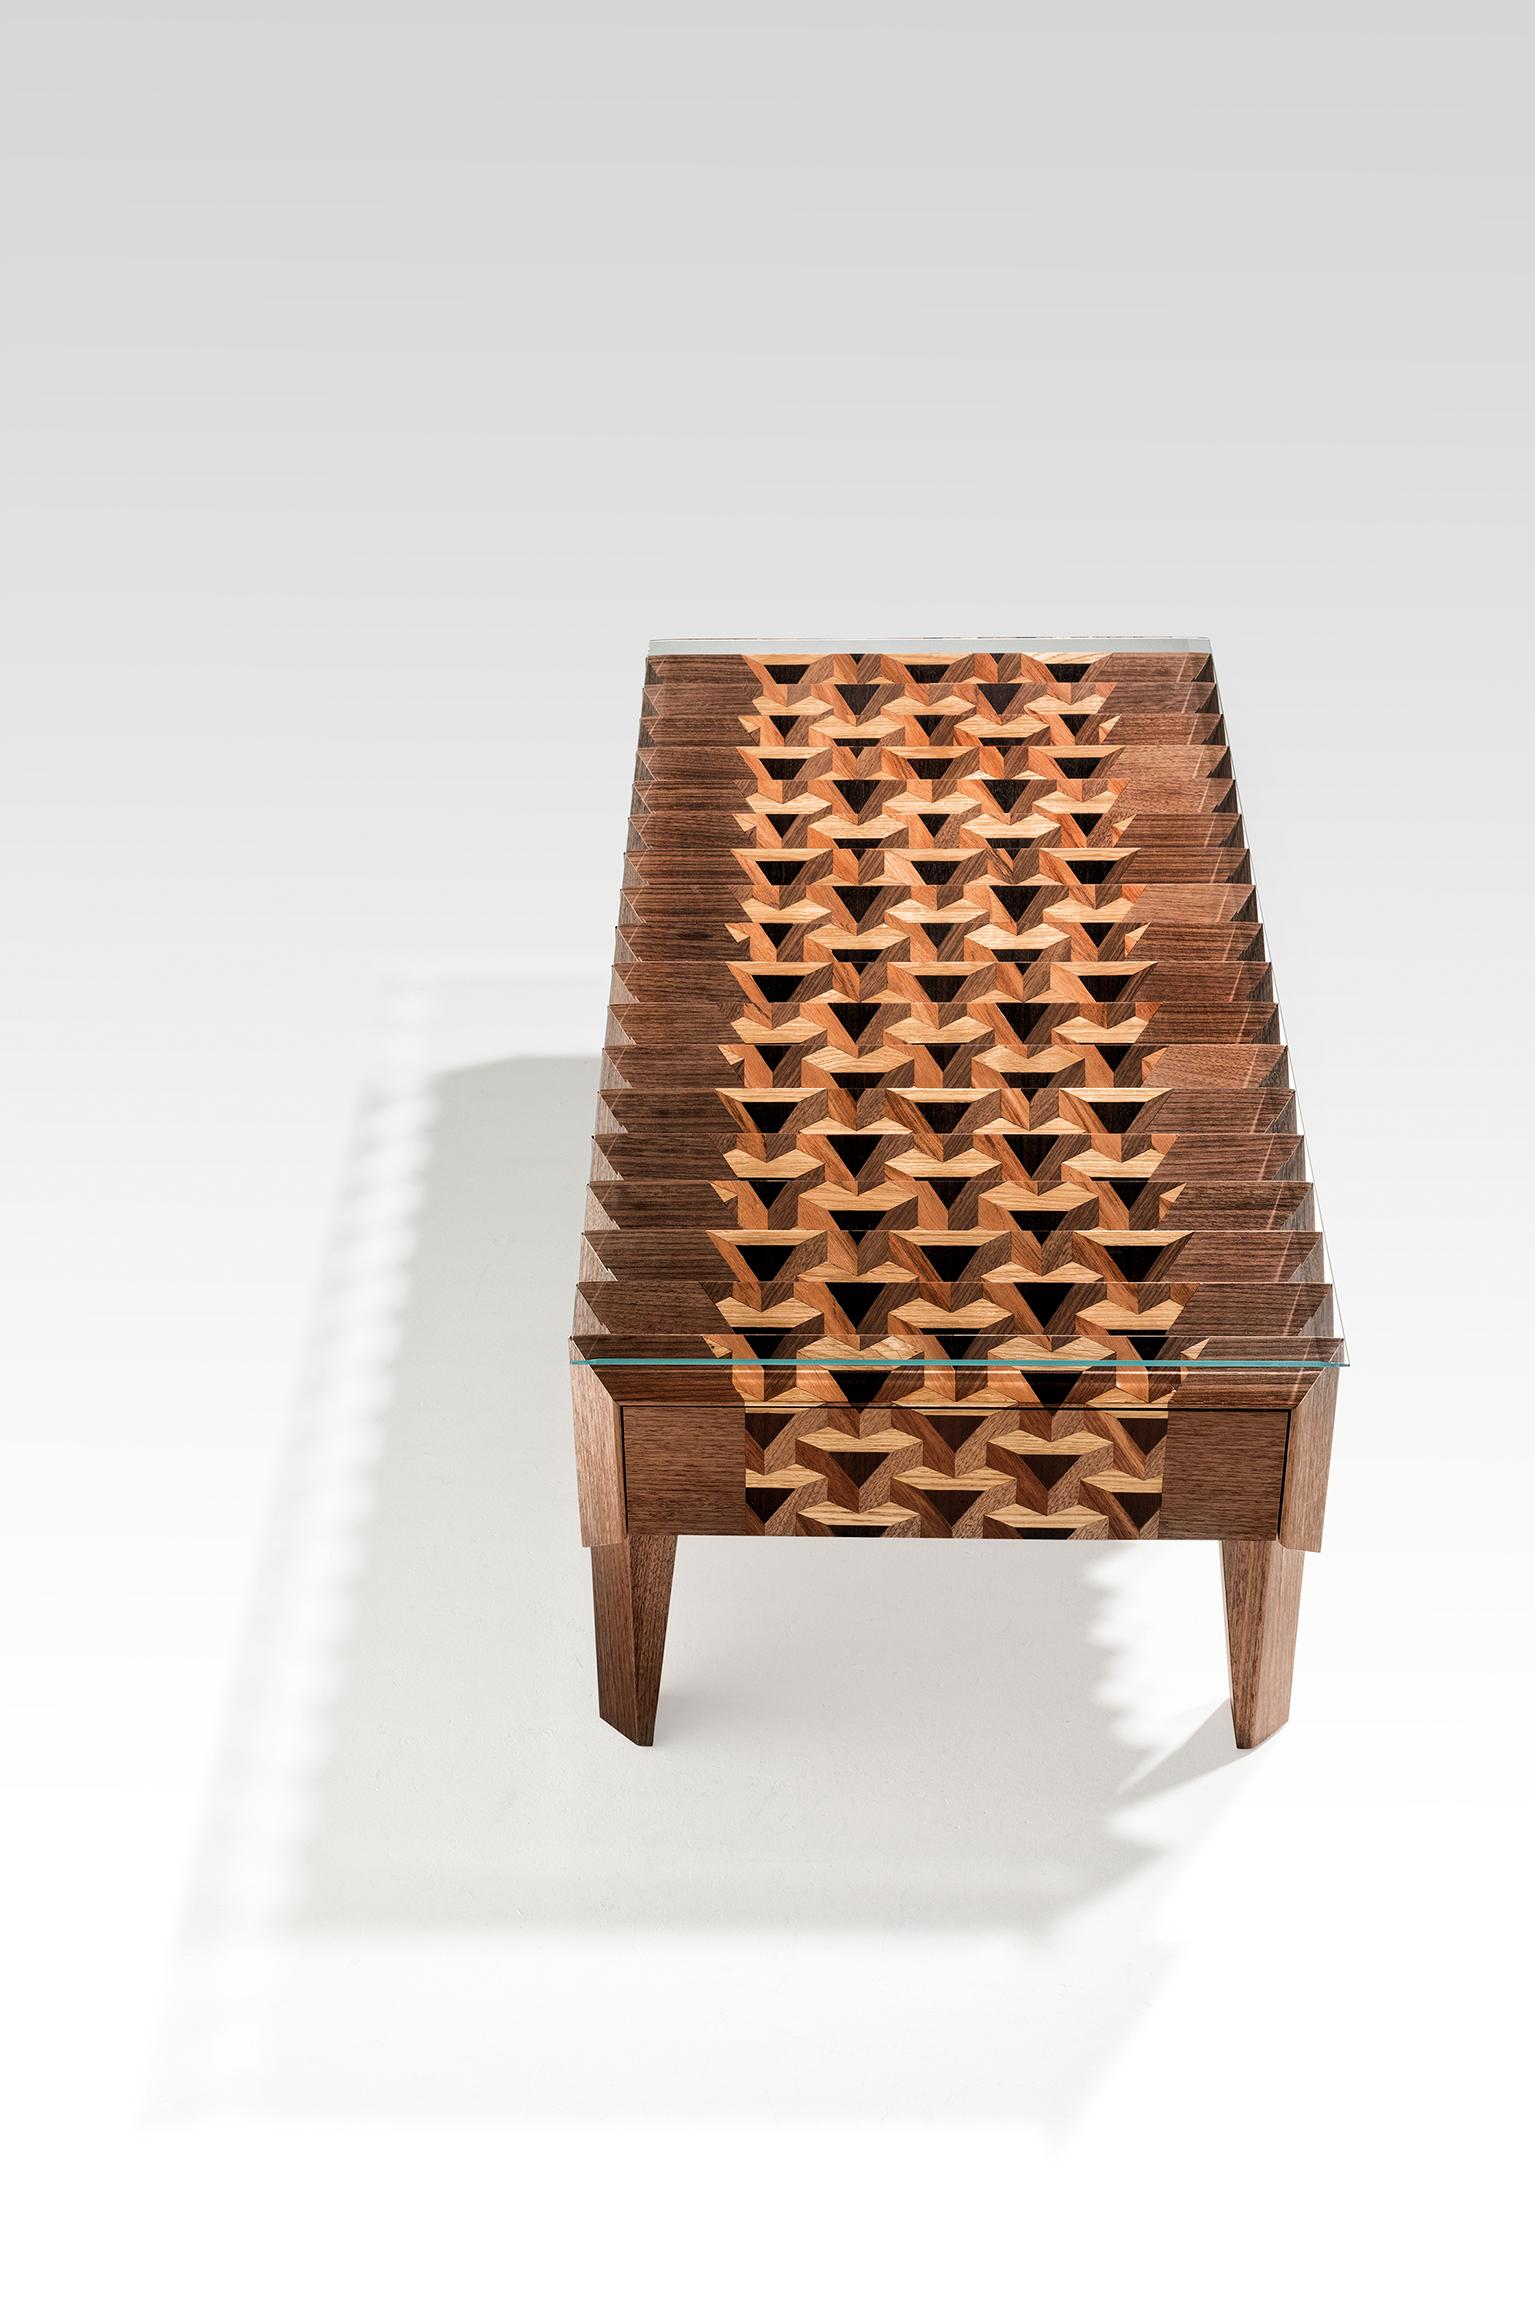 Dutch Walnut Wood Coffee Table Triangles Pattern The Netherlands By Sordile